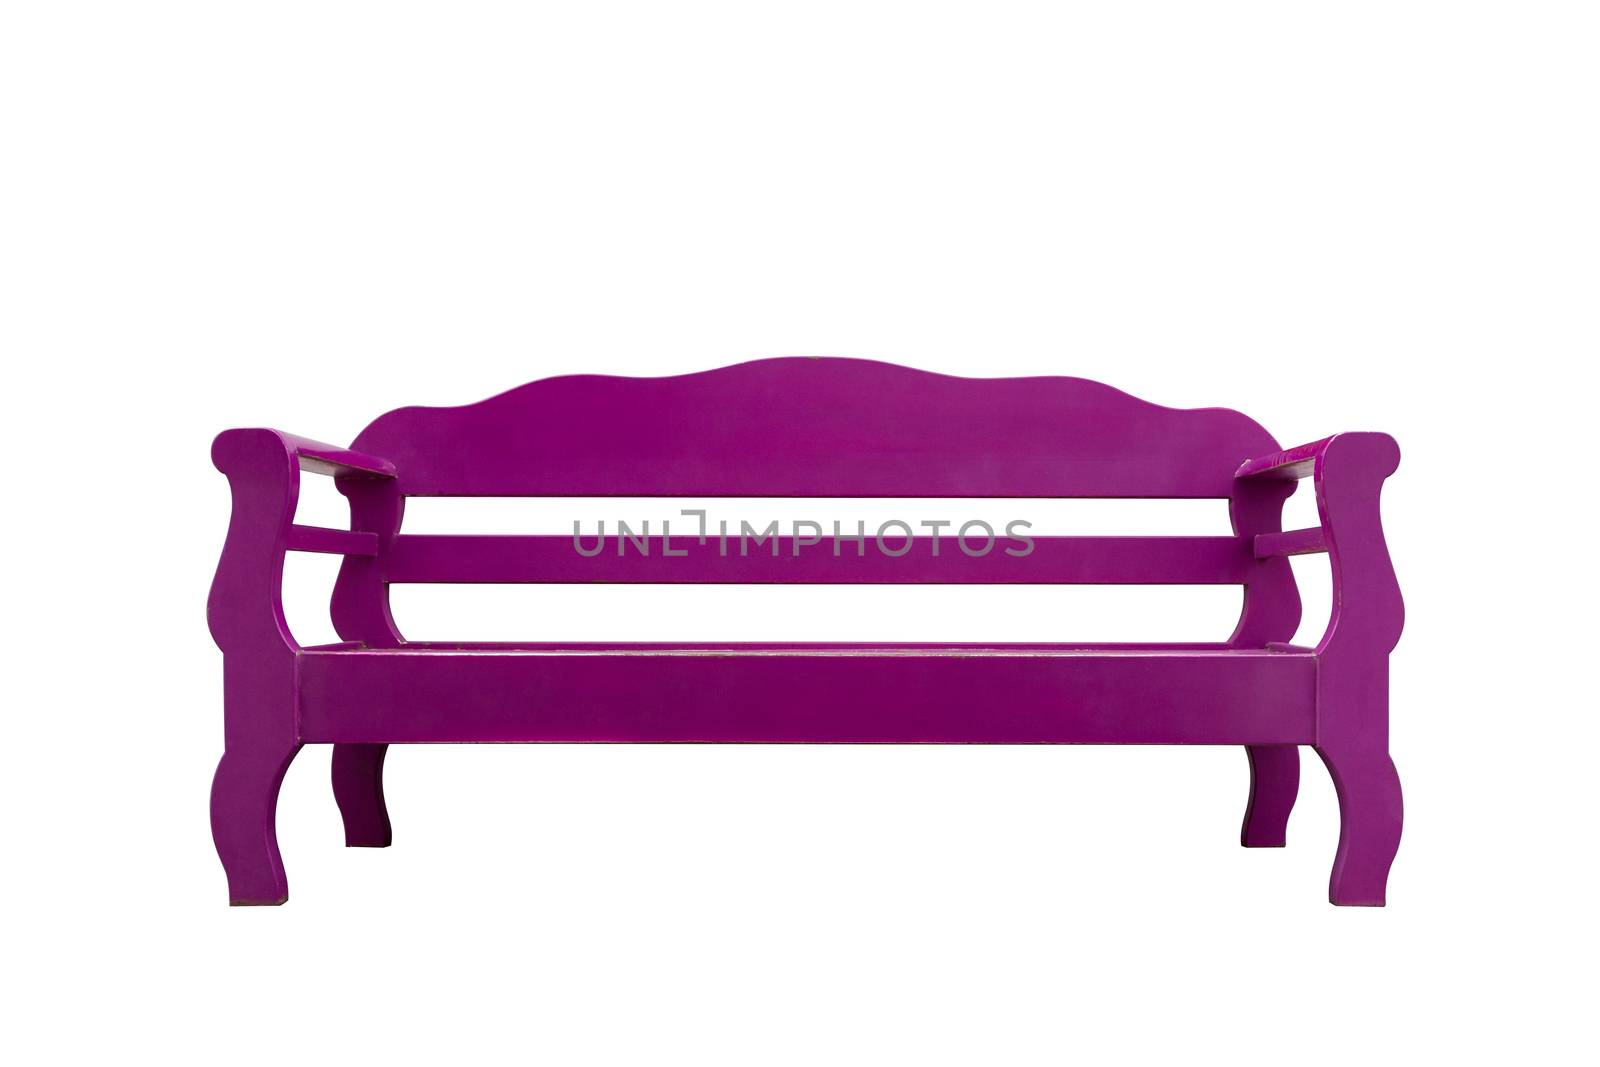 Purple wooden bench isolate on white background.